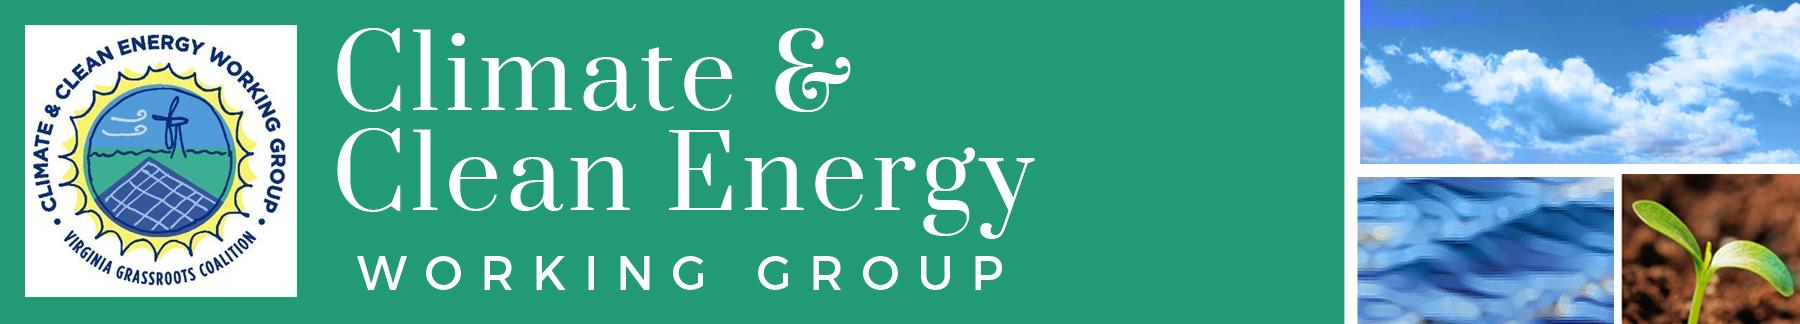 Climate and Clean Energy Working Group